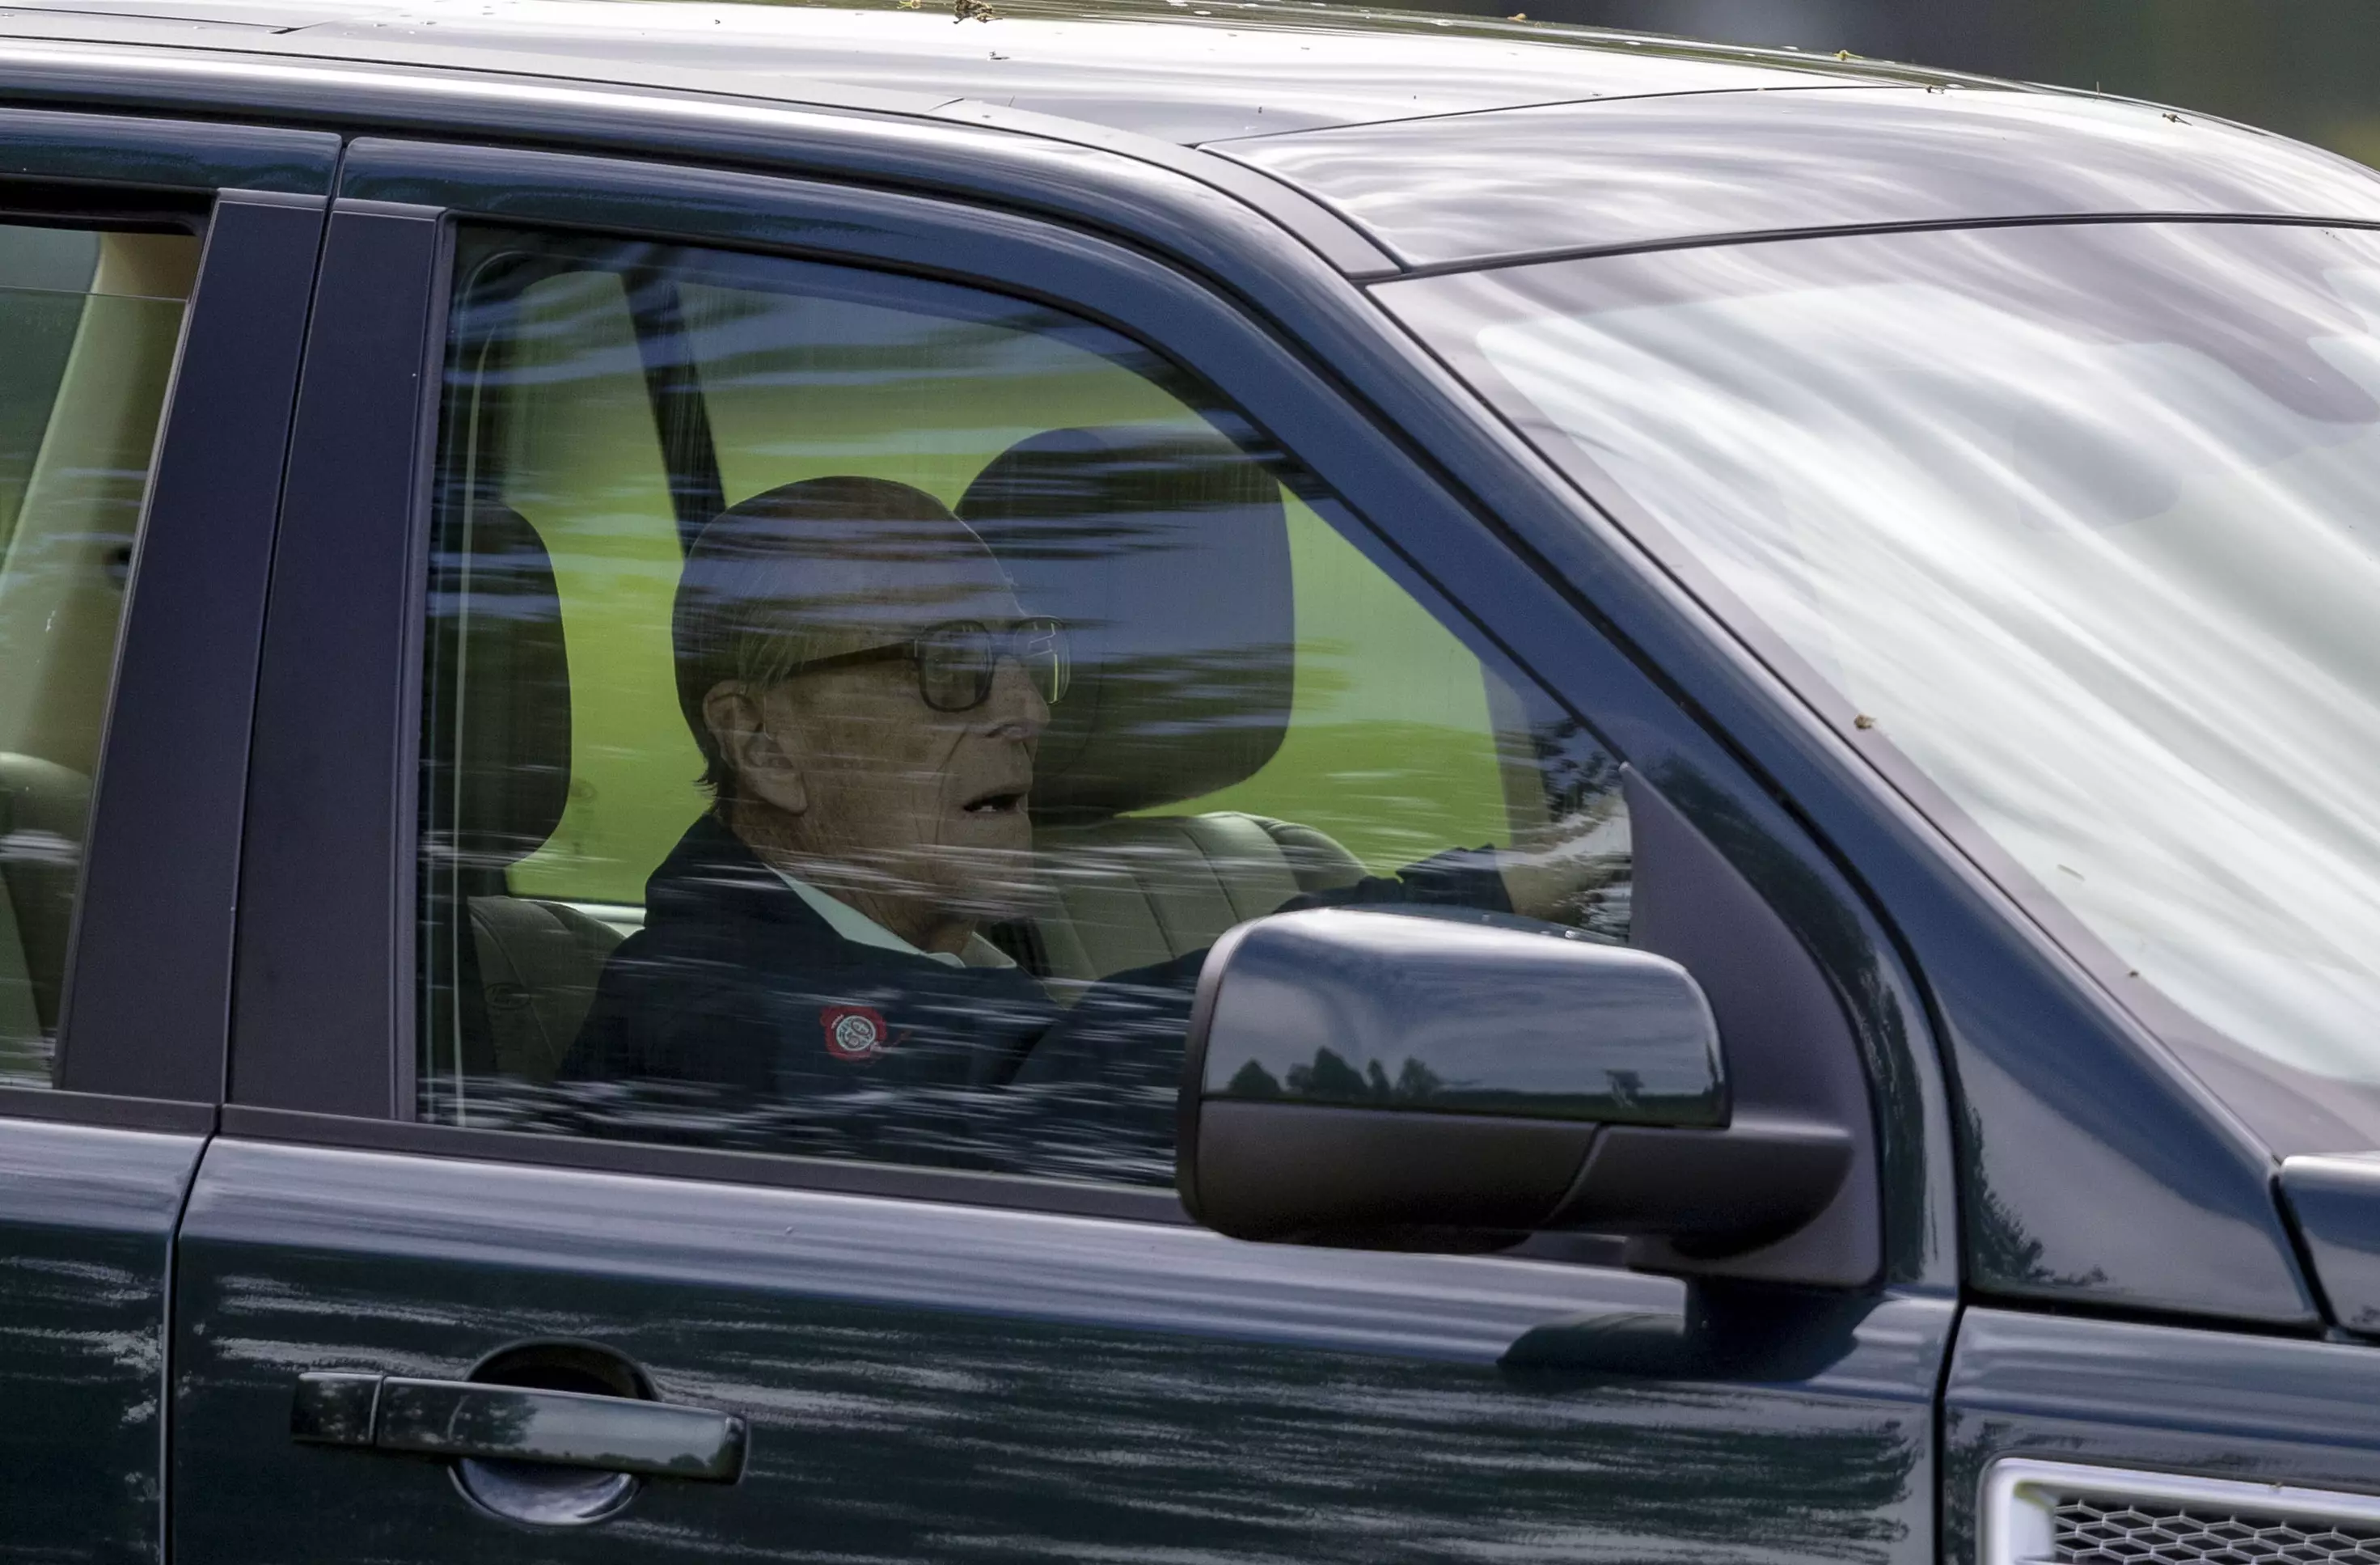 Prince Philip is his car.